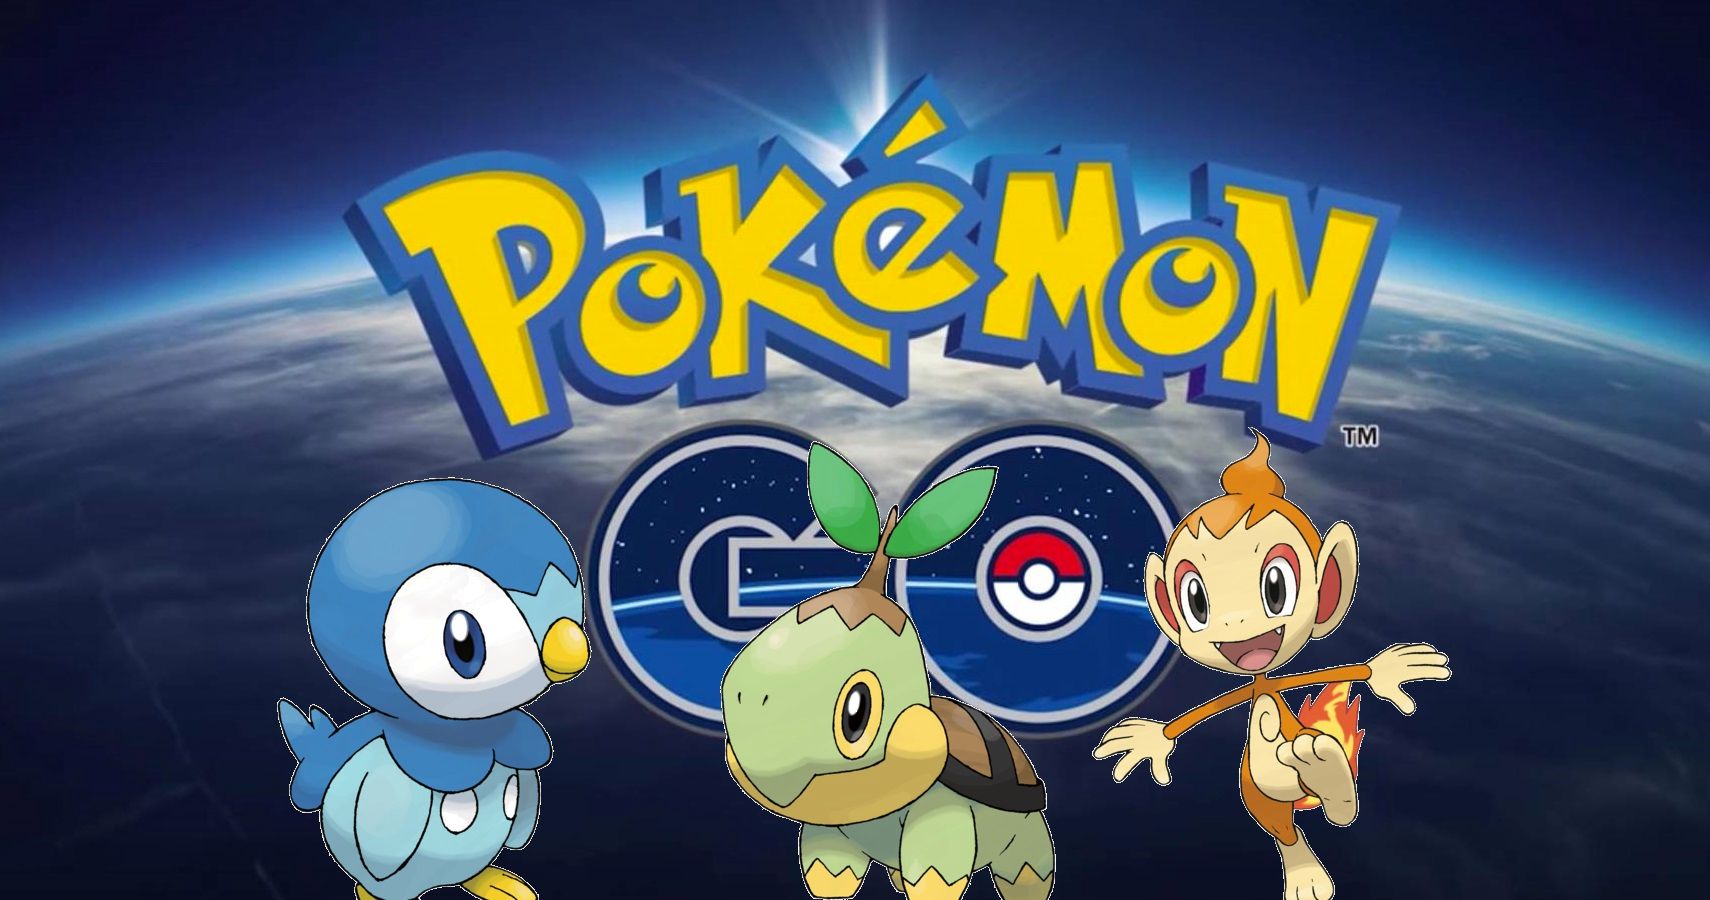 Pokémon GO Teases The Upcoming Release Of Generation 4 Nearly A Year After Gen 3